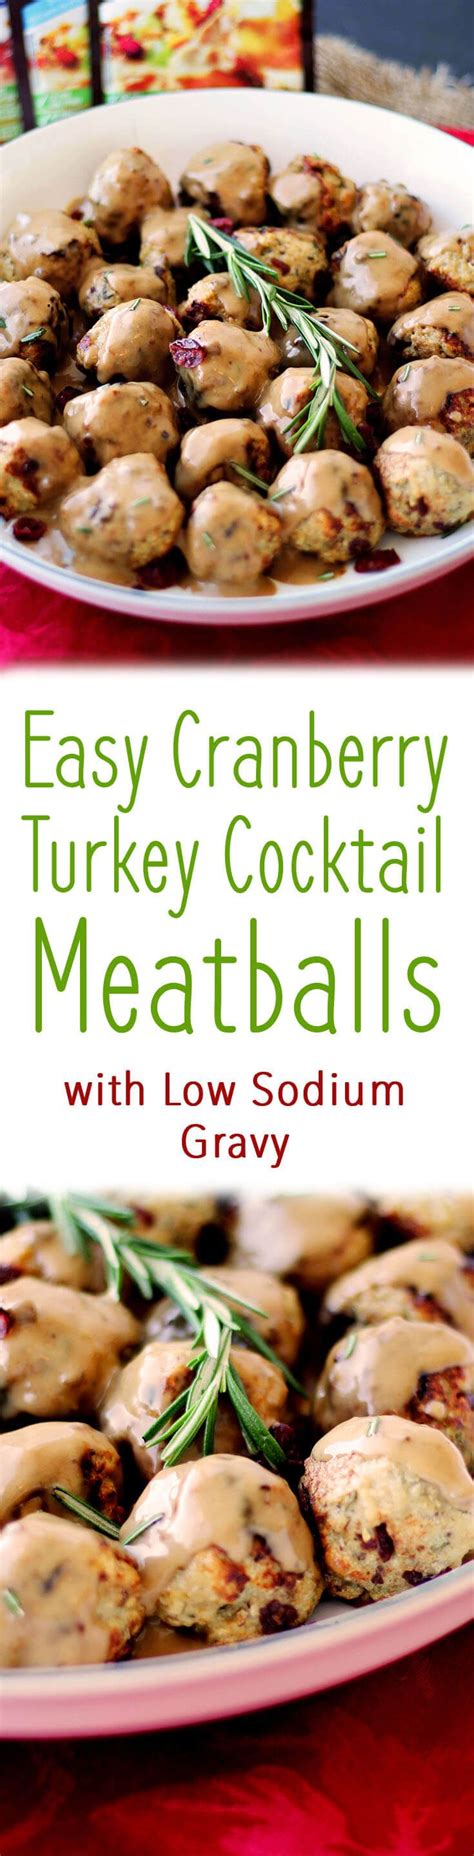 These Cranberry Turkey Cocktail Meatballs Make Perfect Healthy Holiday